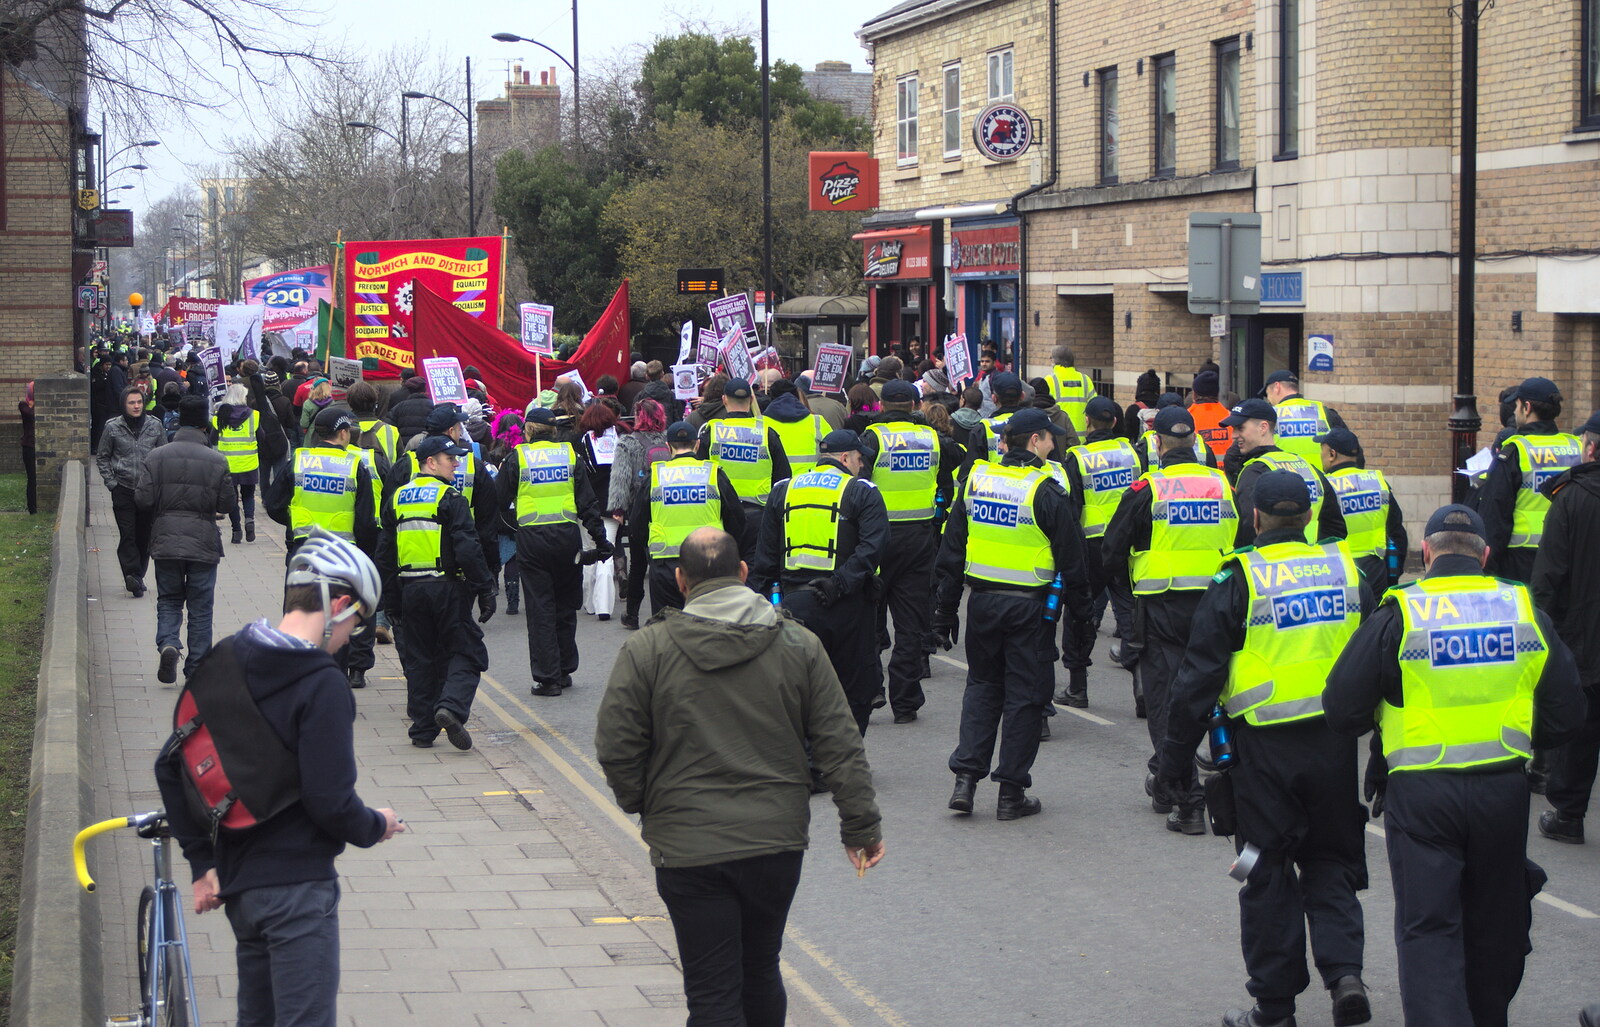 A mass of police follows the demo up the road from An Anti-Fascist March, Mill Road, Cambridge - 23rd February 2013